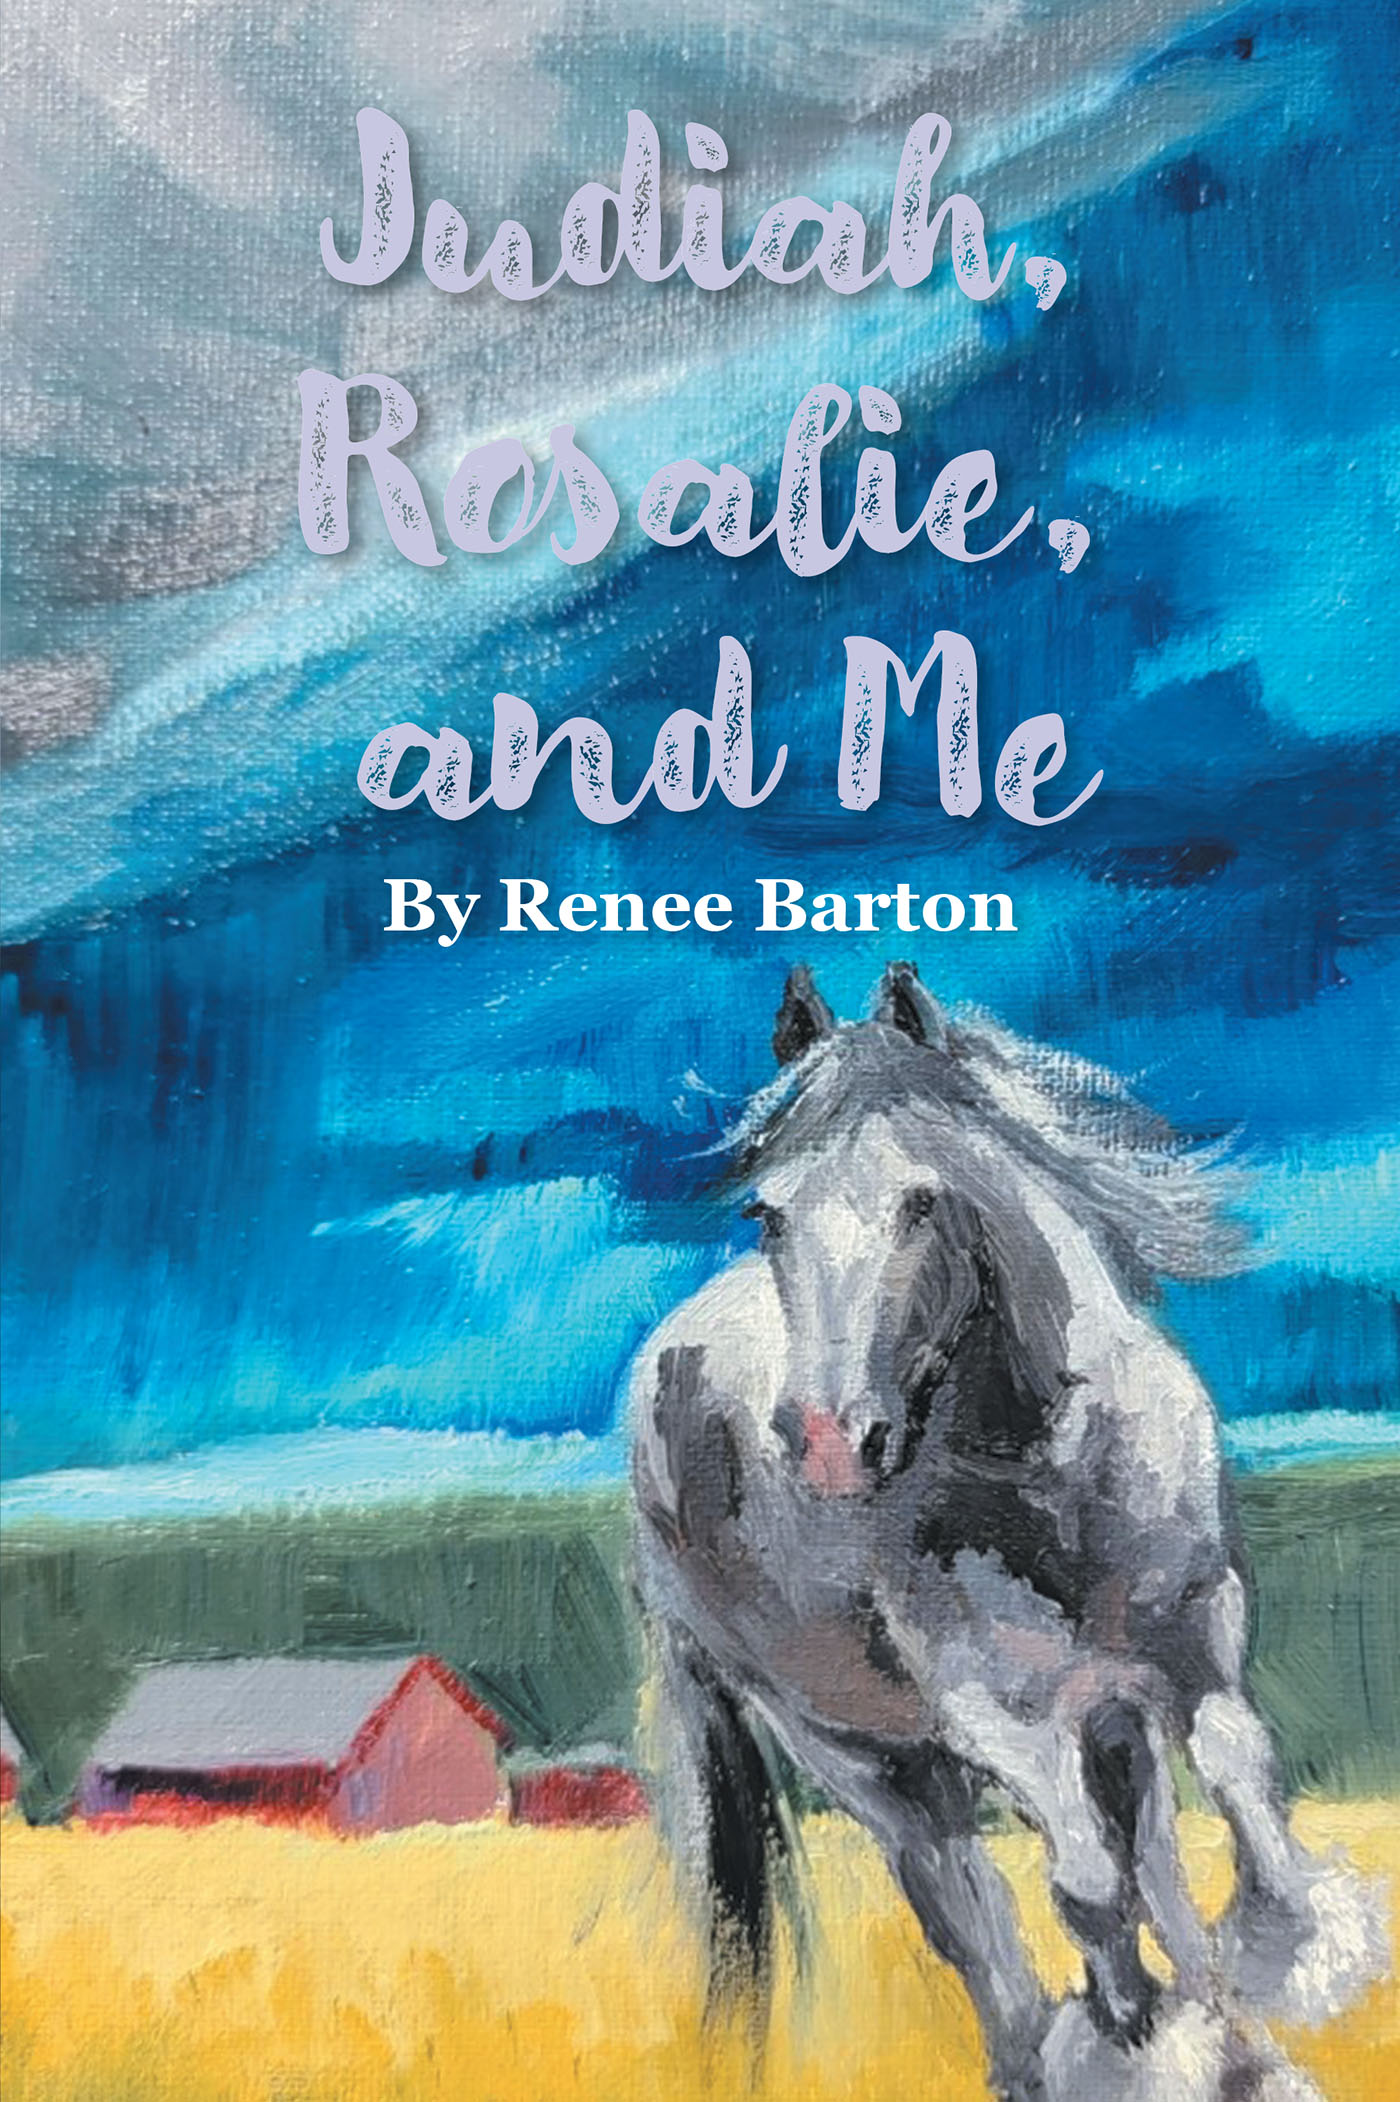 Author Renee Barton’s New Book, "Judiah, Rosalie, and Me," is an Engrossing Romance Between People from Two Completely Different Worlds